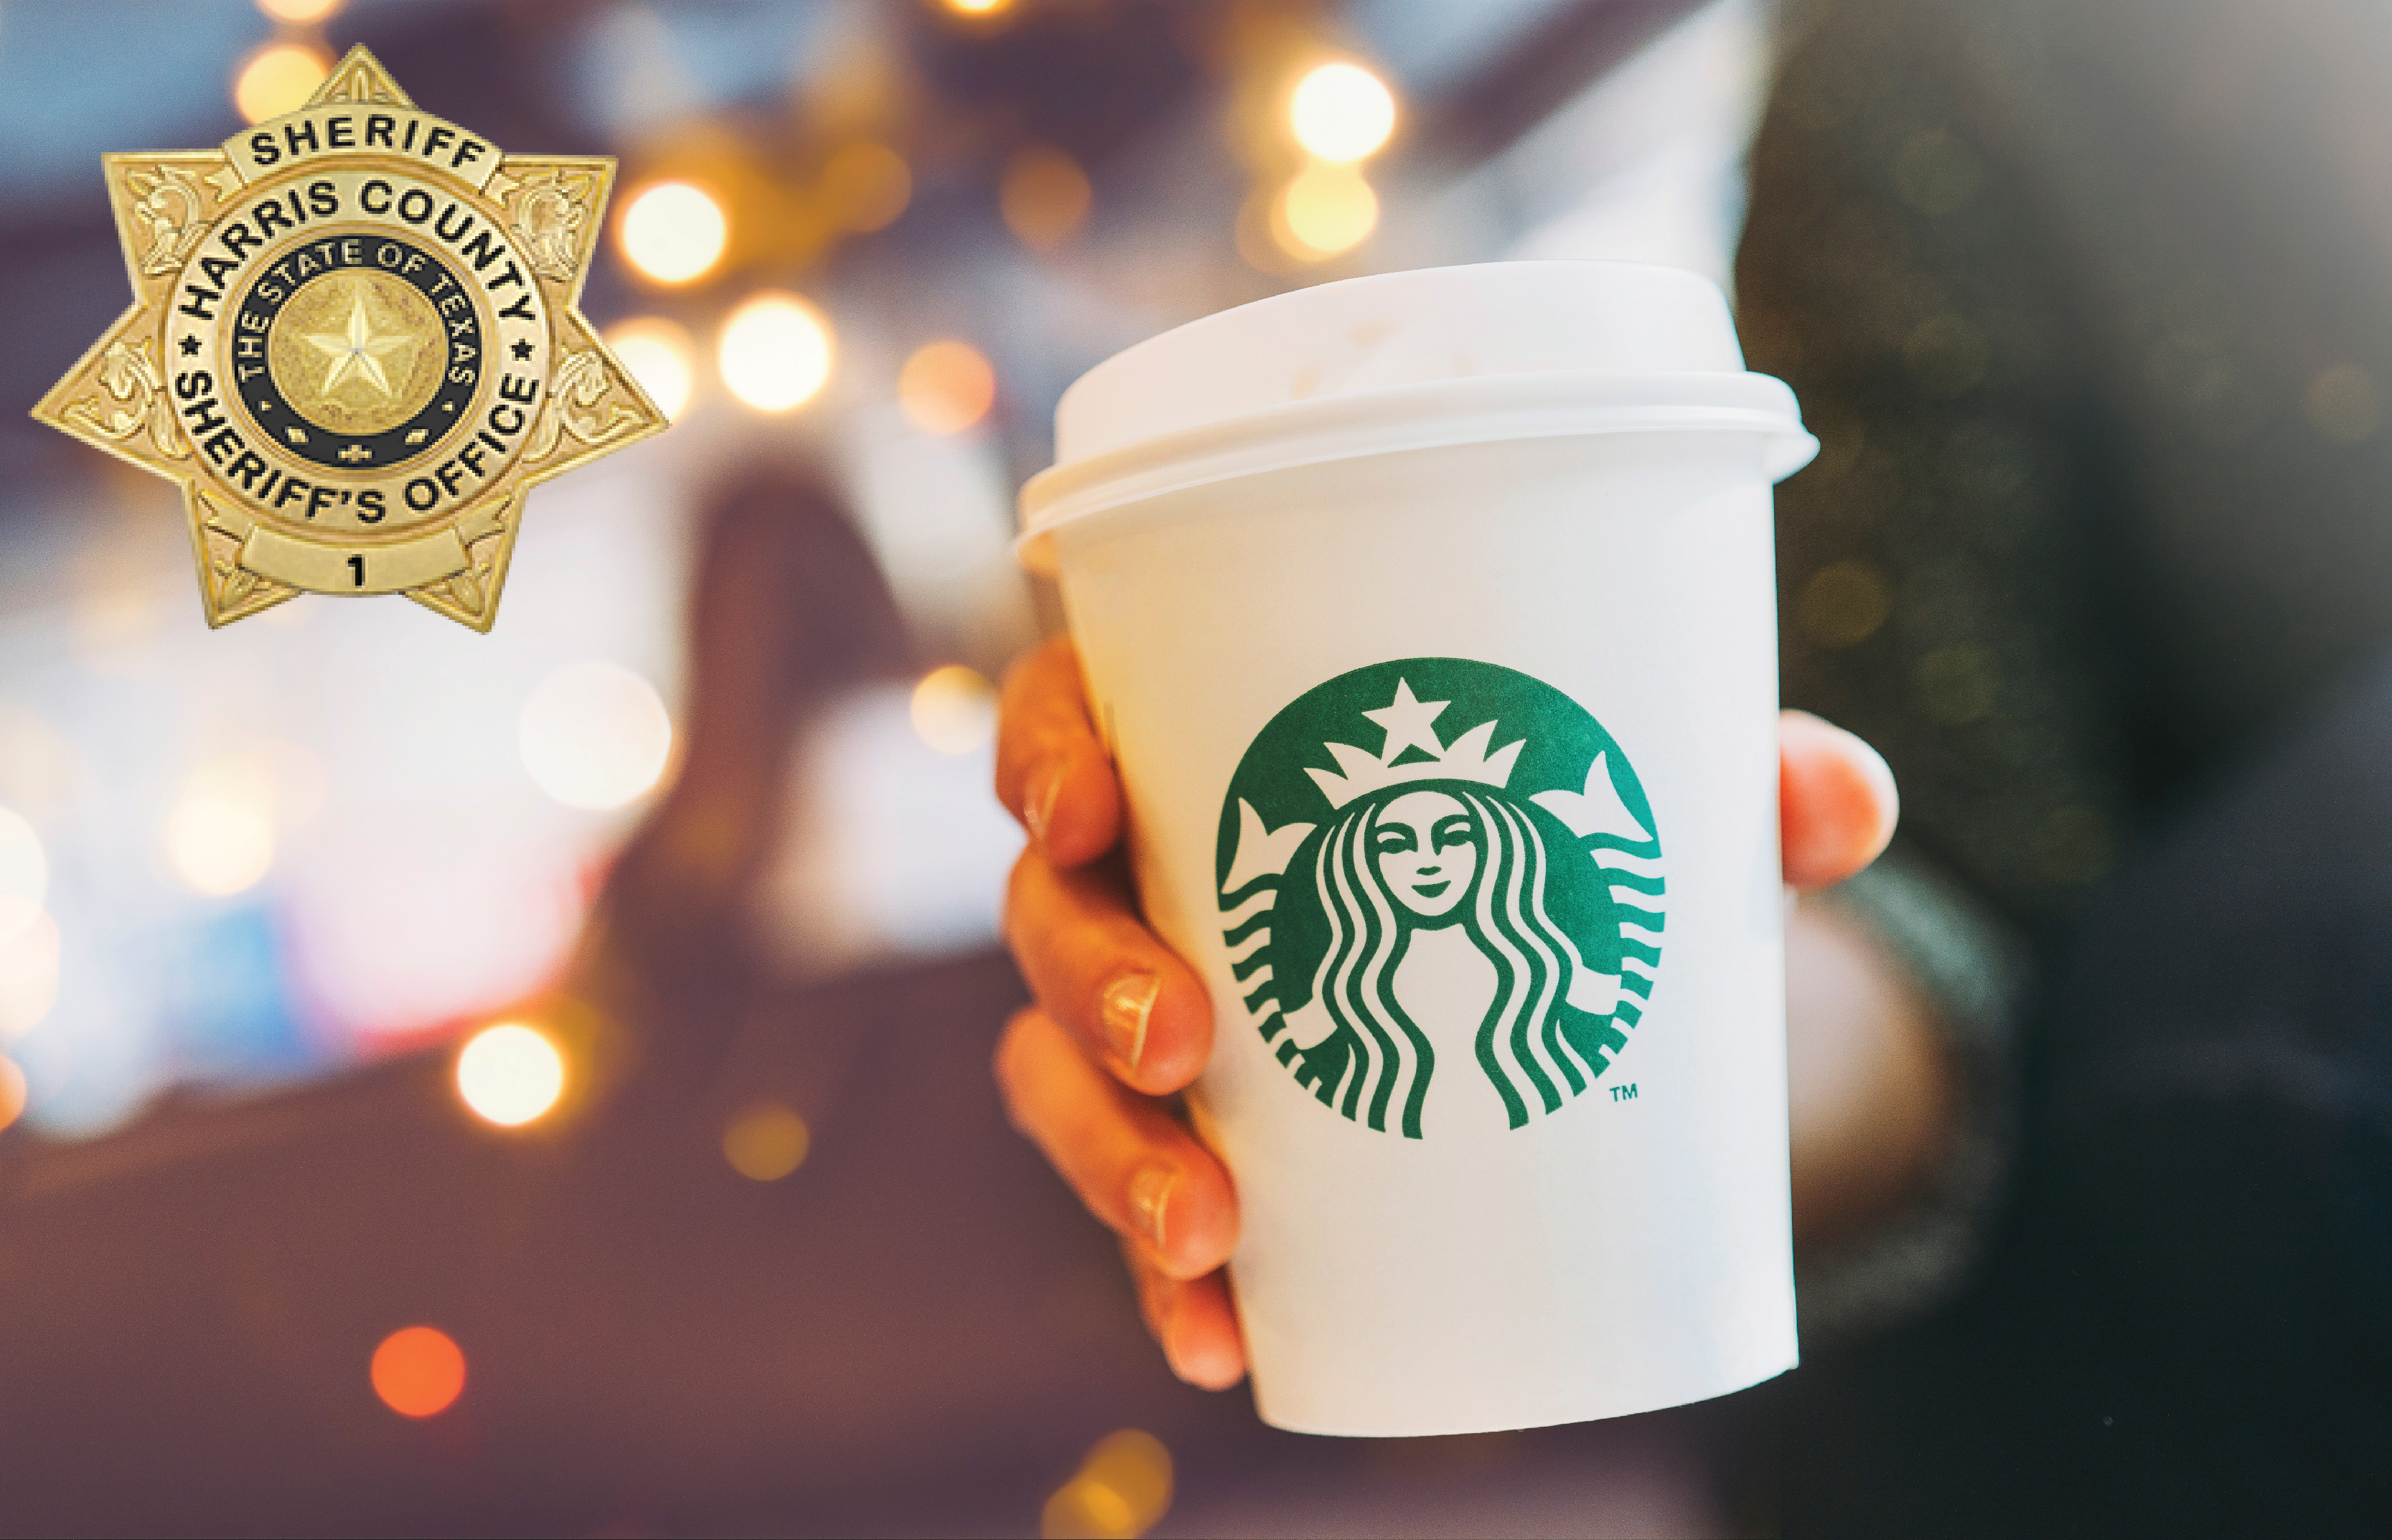 Learn About Law Enforcement Careers with HCSO at Starbucks Near Cypress This Month